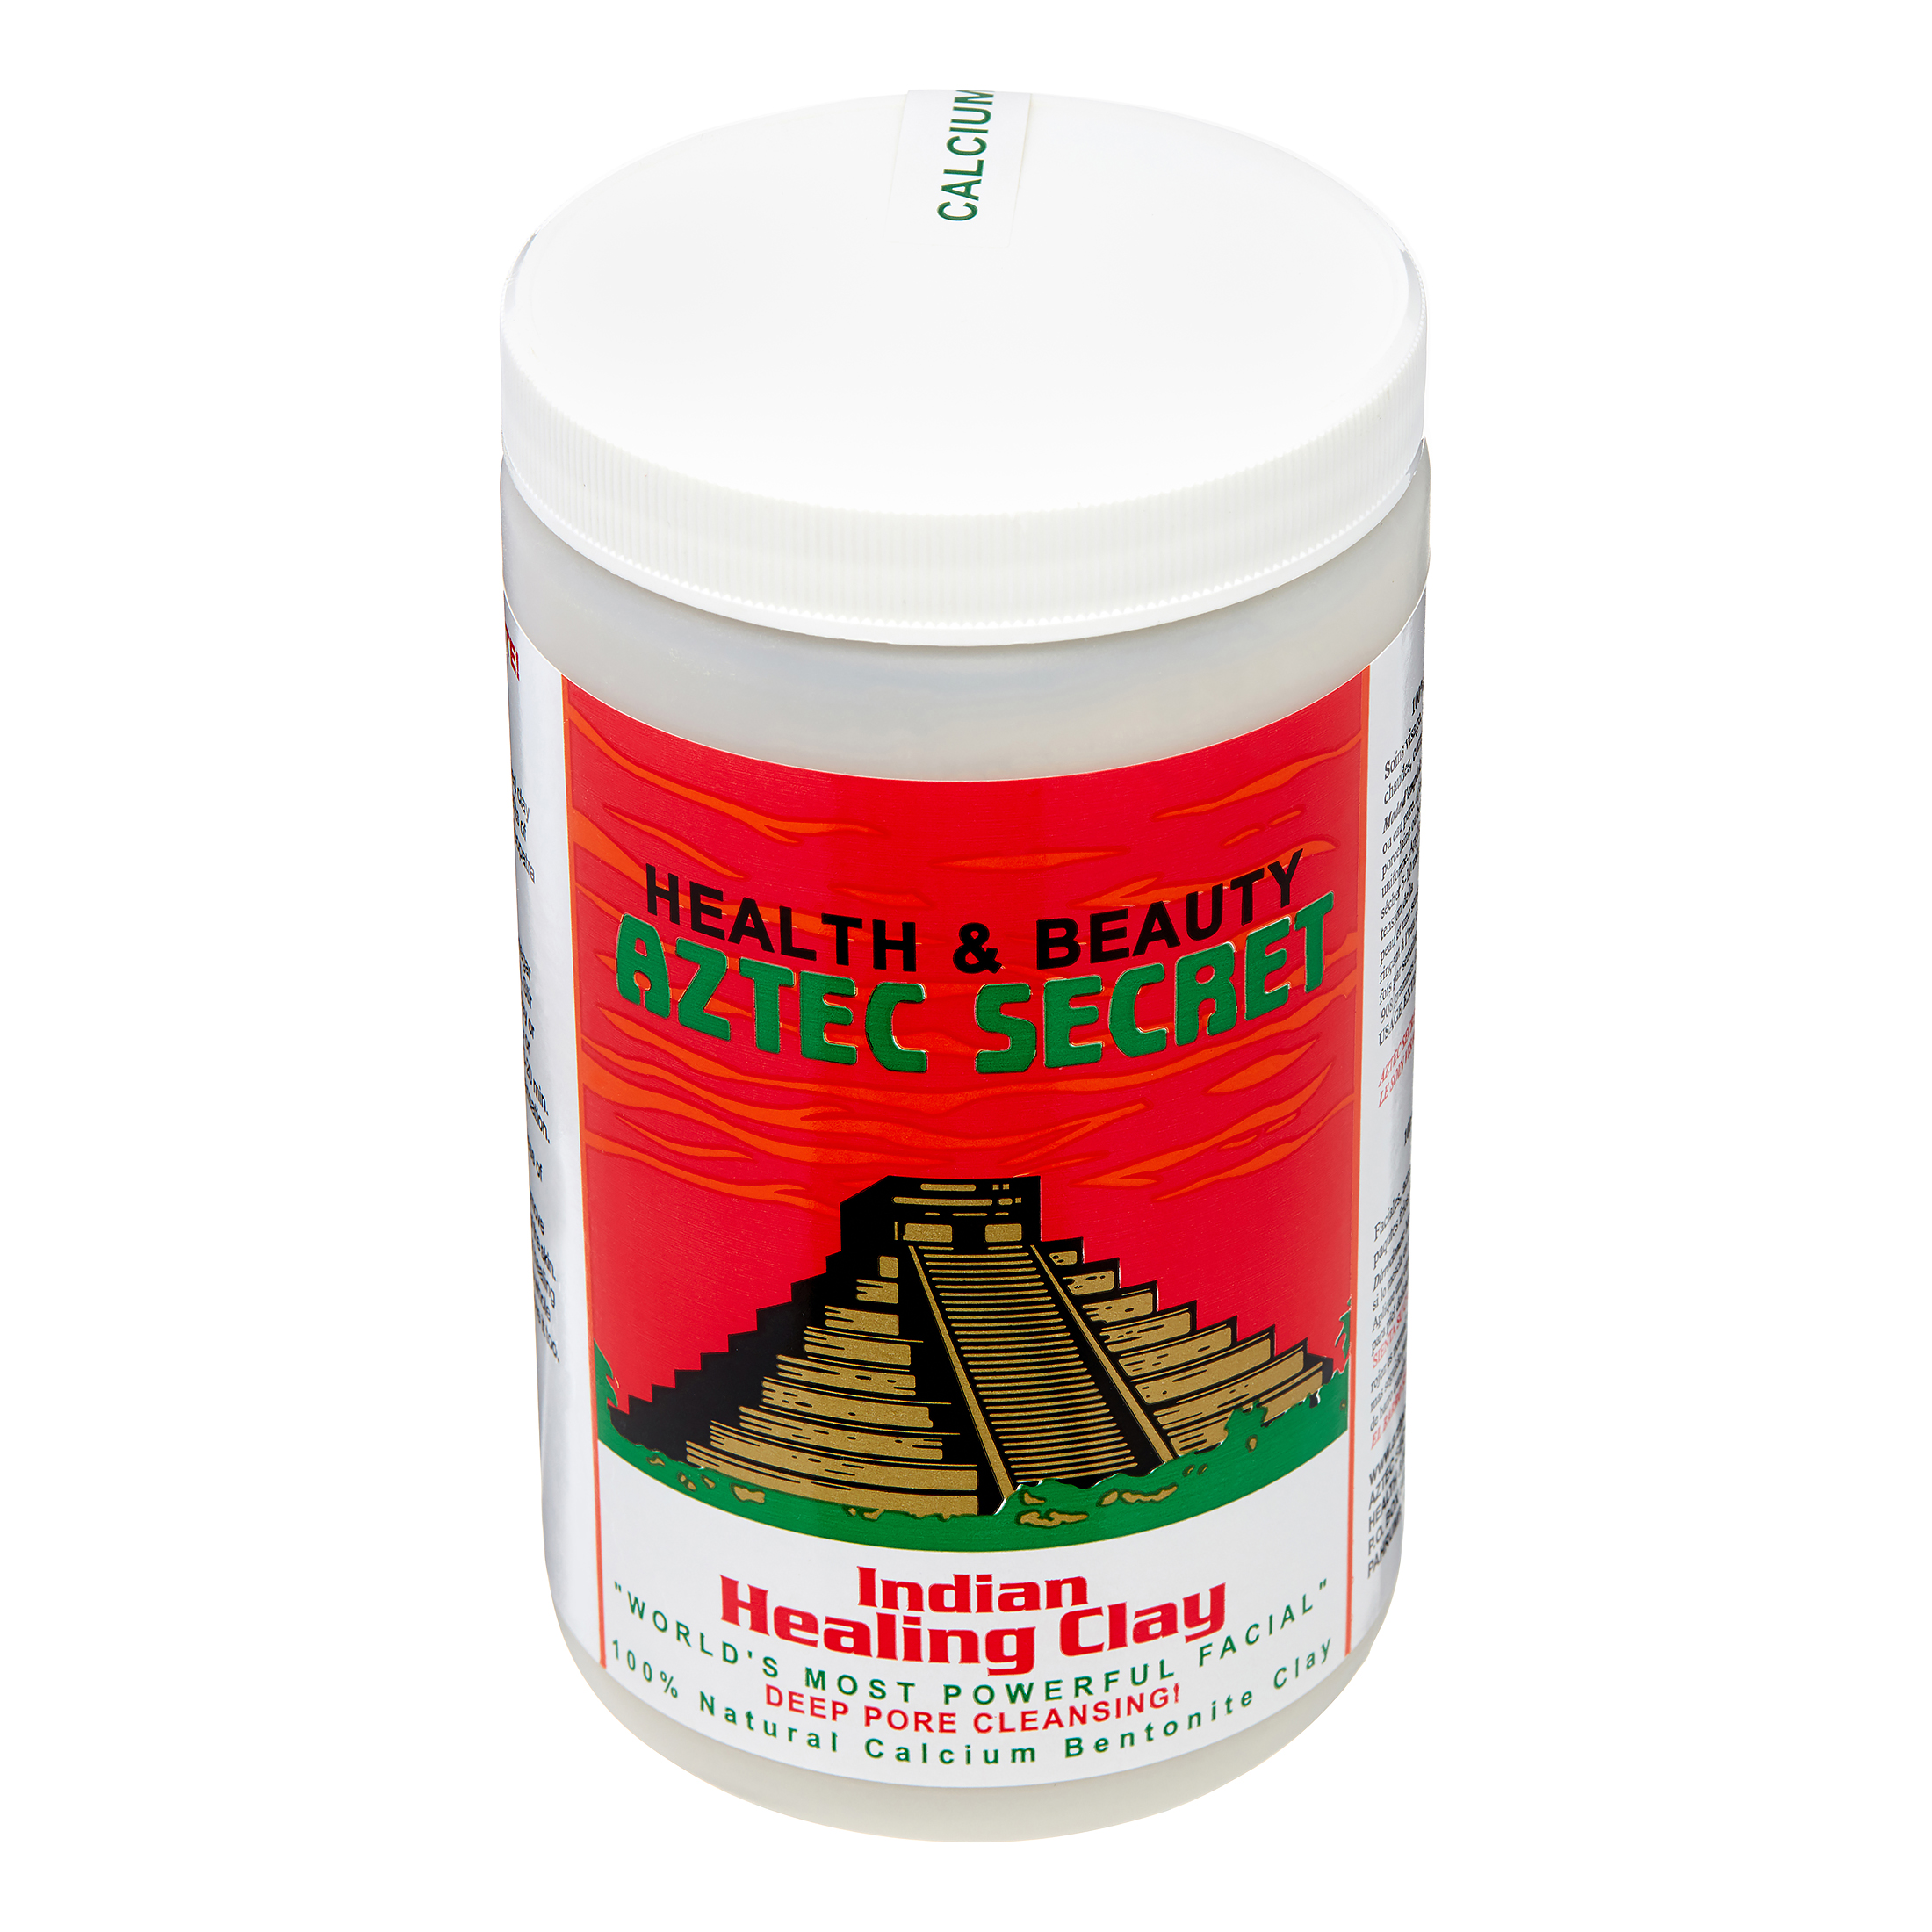 Aztec Secret Indian Healing Clay, 2 Pound - image 2 of 7